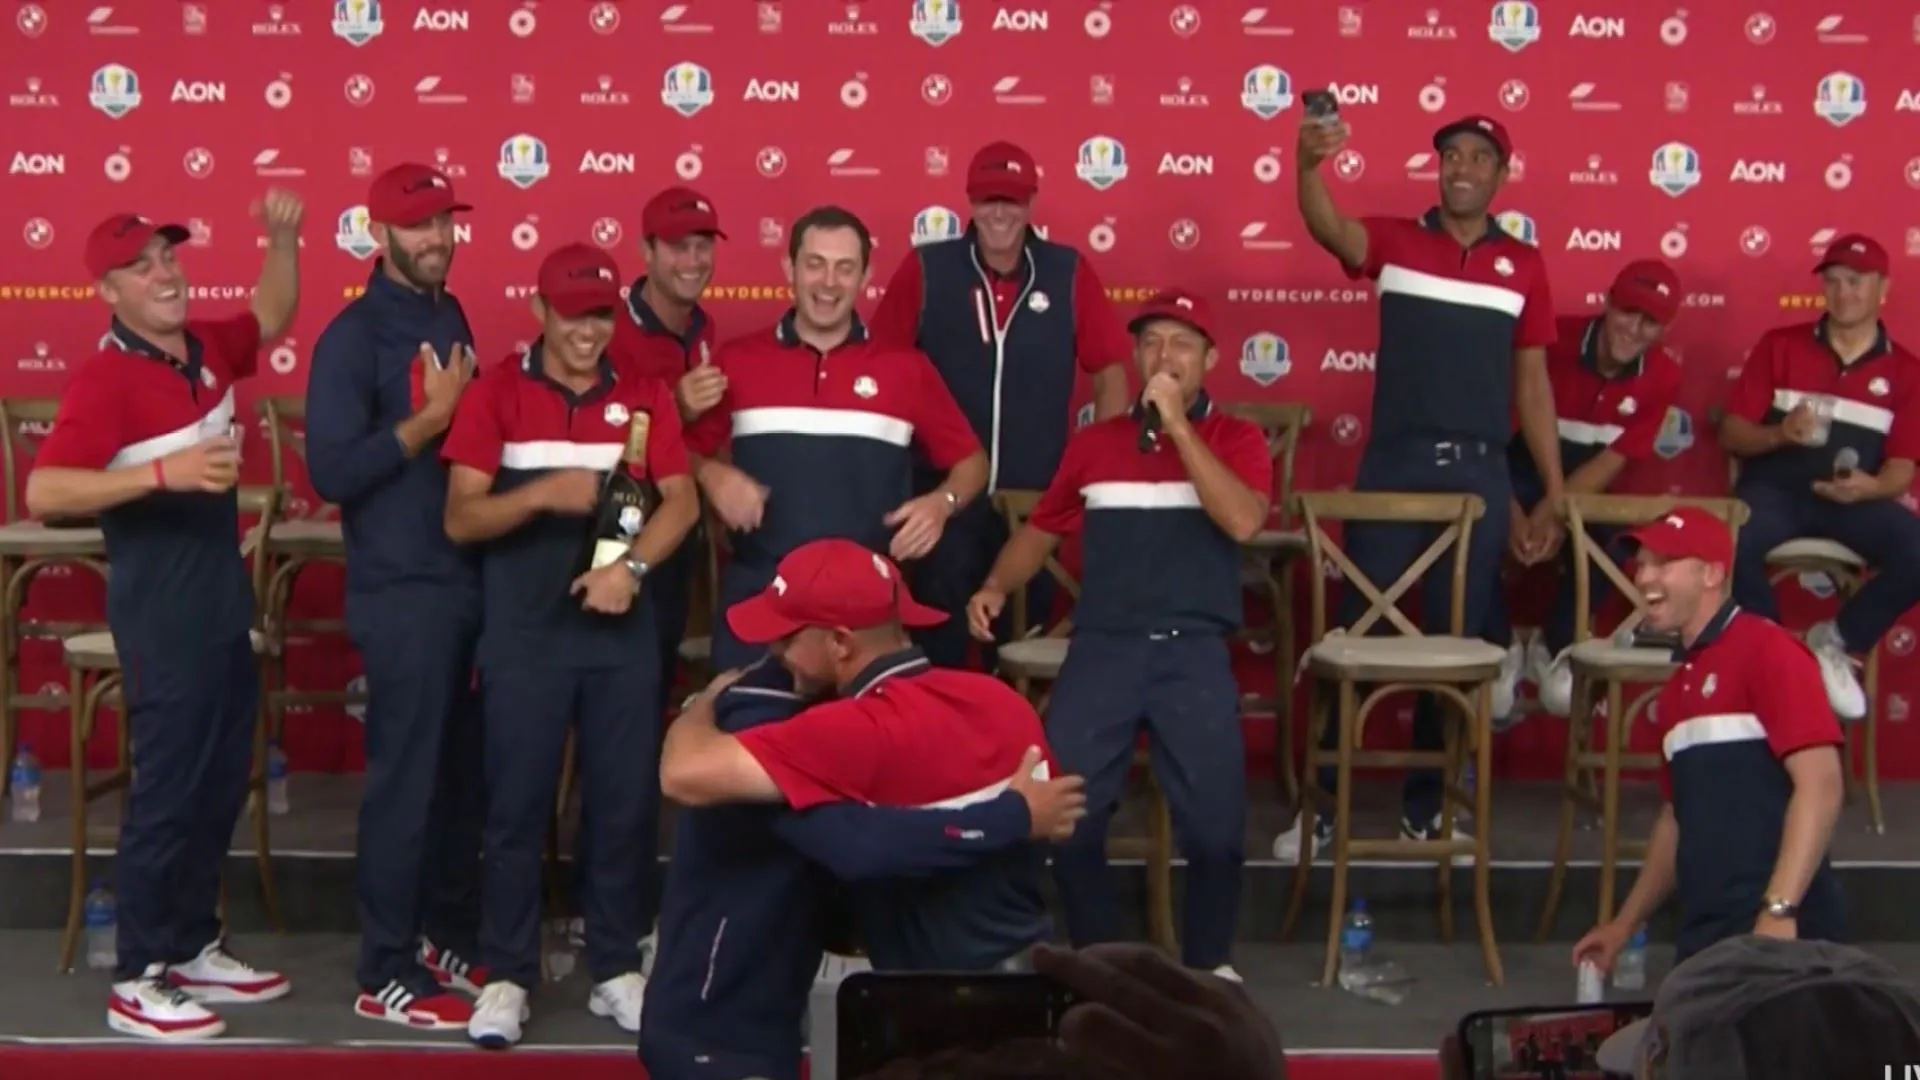 2020 Ryder Cup: Bryson DeChambeau and Brooks Koepka hug and erupt into song while holding Ryder Cup